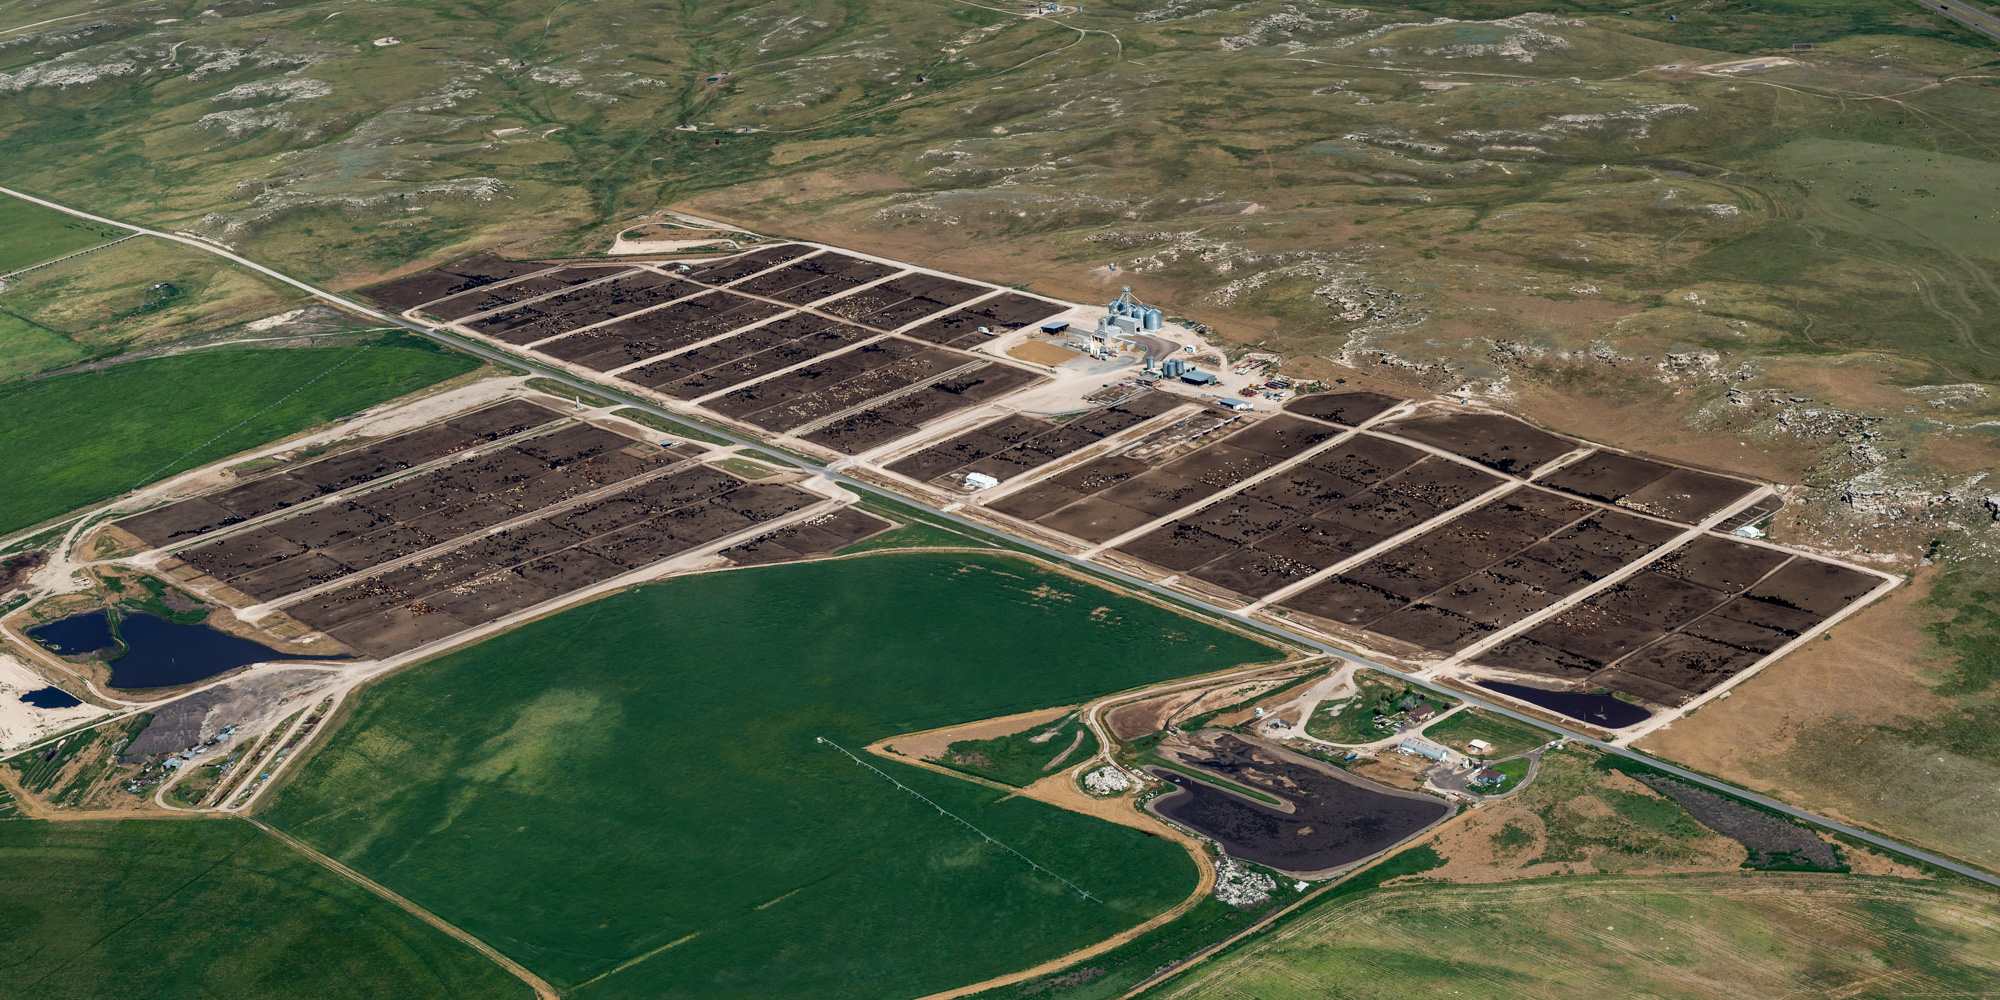 Aerial view of the Dinklage Feed Yards at the Sidney, Nebraska facility.